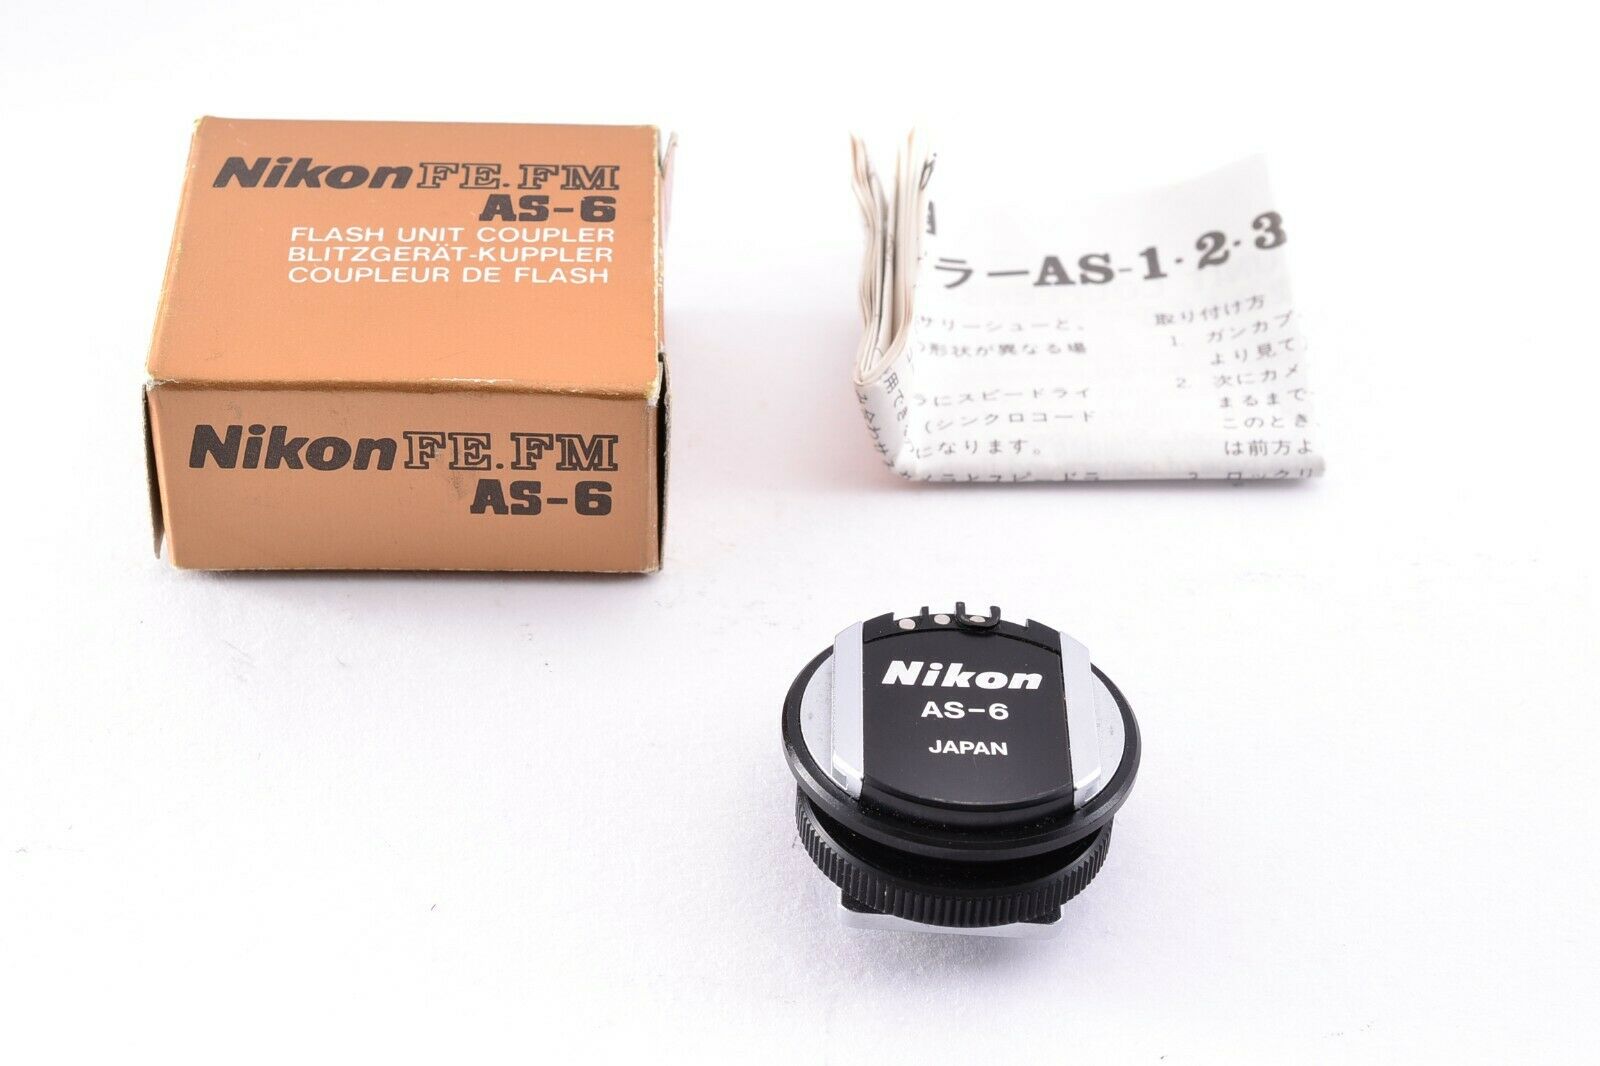 Almost Unused In Box Nikon As-6 As-4 Flash Unit Coupler Adapters Mf Camera Fm F